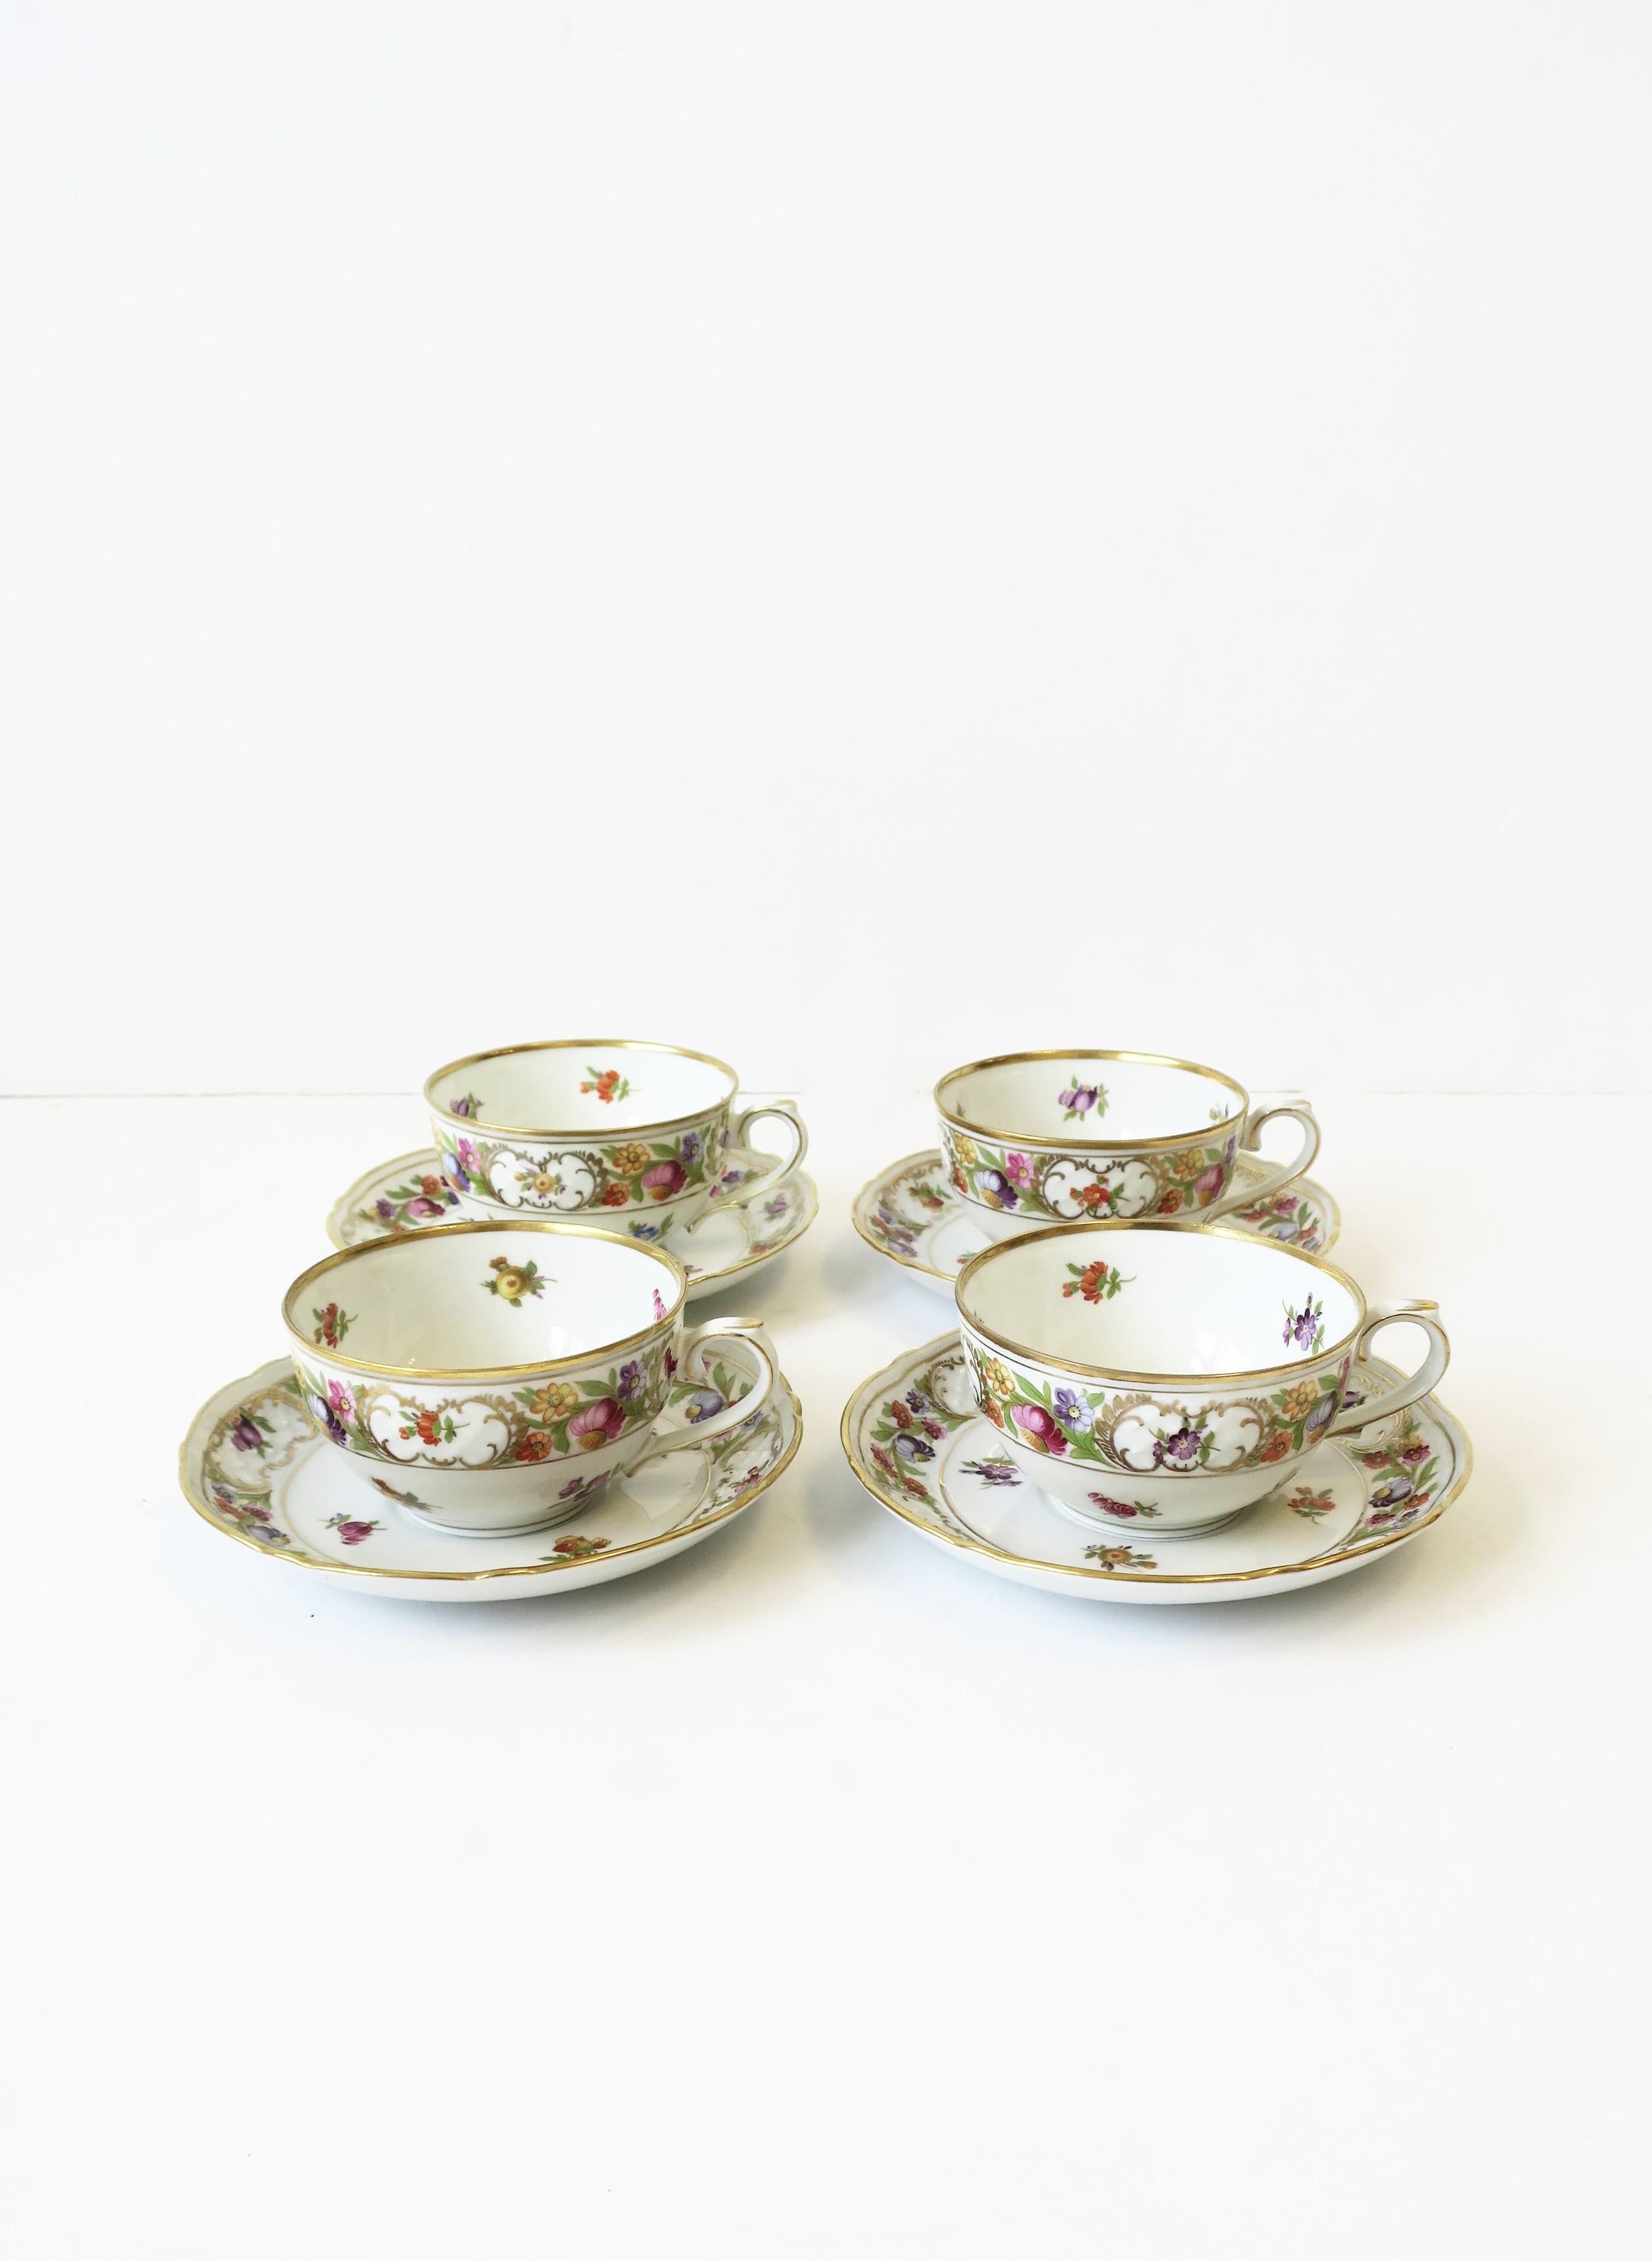 20th Century German Porcelain Coffee or Tea Cup and Saucer, Set of 4 For Sale